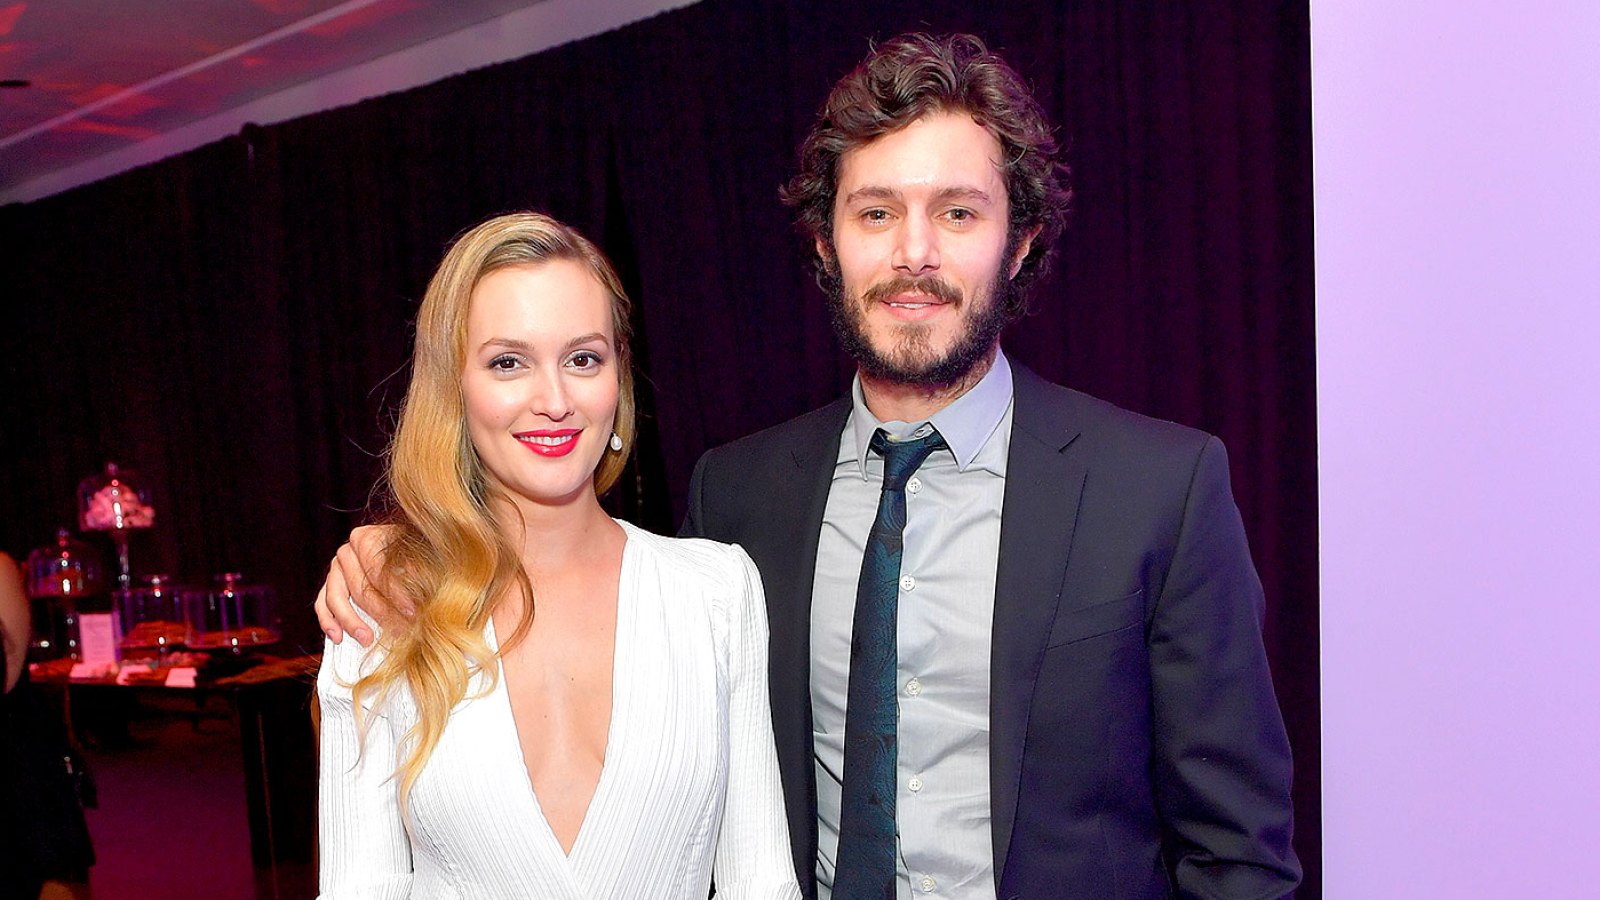 Leighton Meester and Adam Brody attend The 2017 InStyle and Warner Bros. 73rd Annual Golden Globe Awards Post-Party at The Beverly Hilton Hotel on January 8, 2017 in Beverly Hills, California.